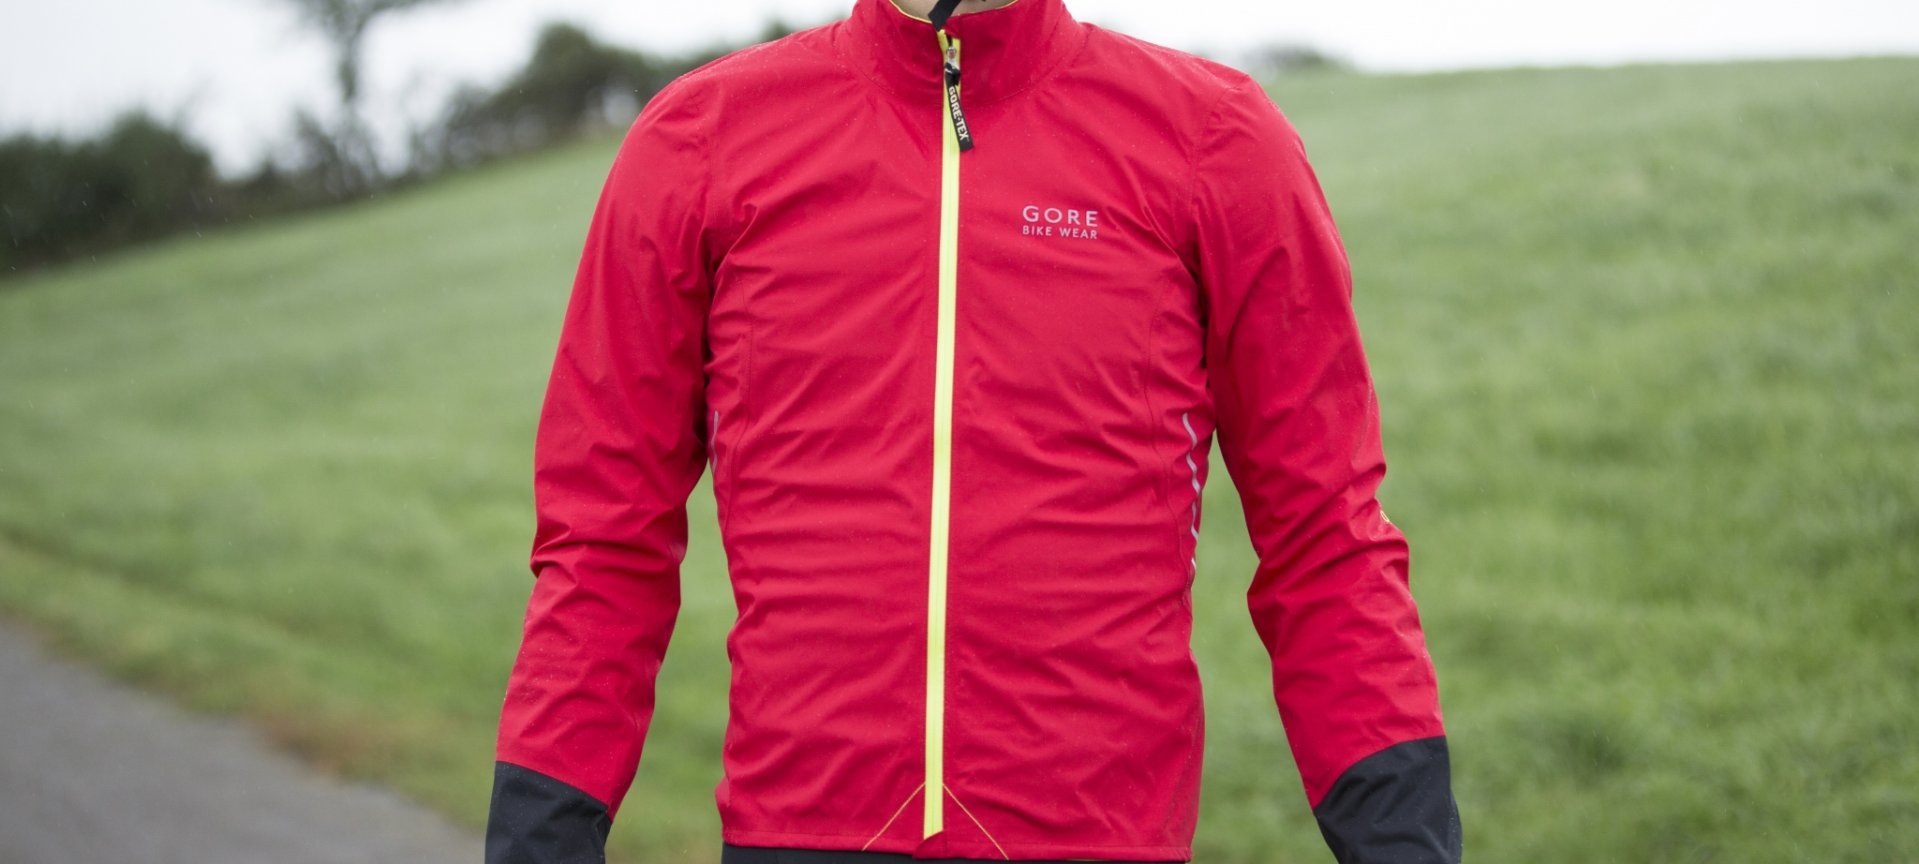 Layer 3 provides protection from the elements.